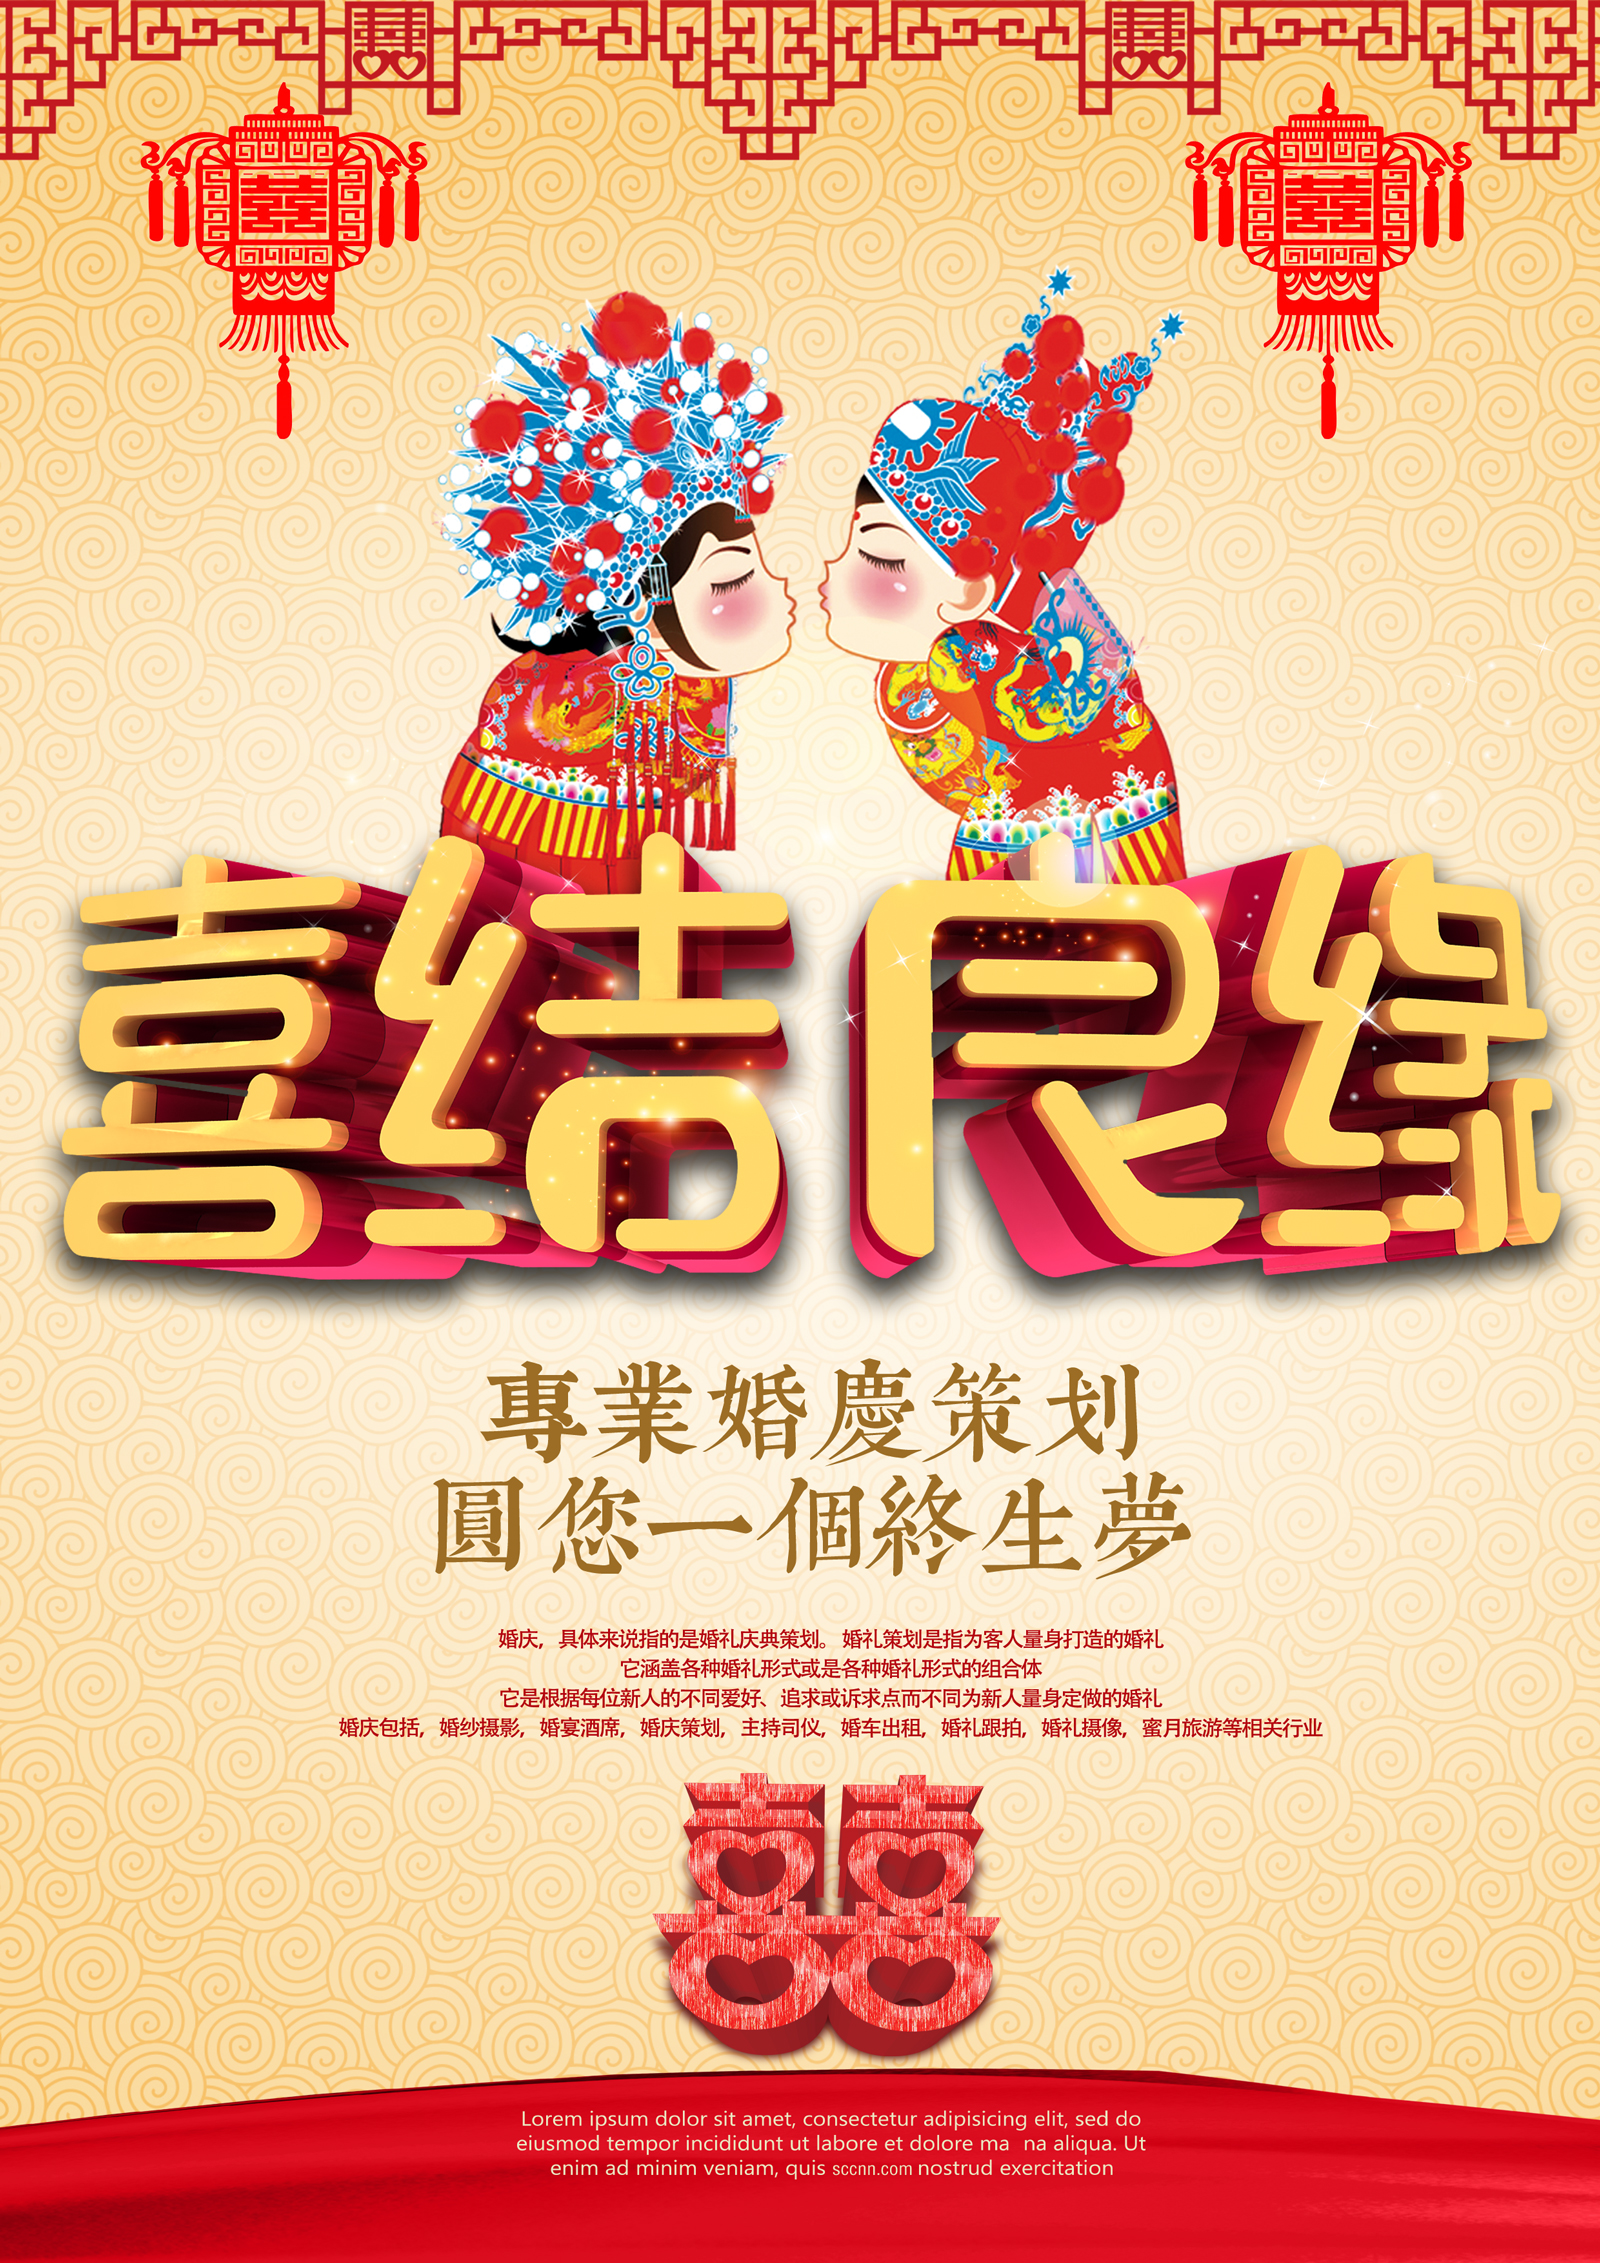 Romantic wedding poster design material - China PSD File Free Download